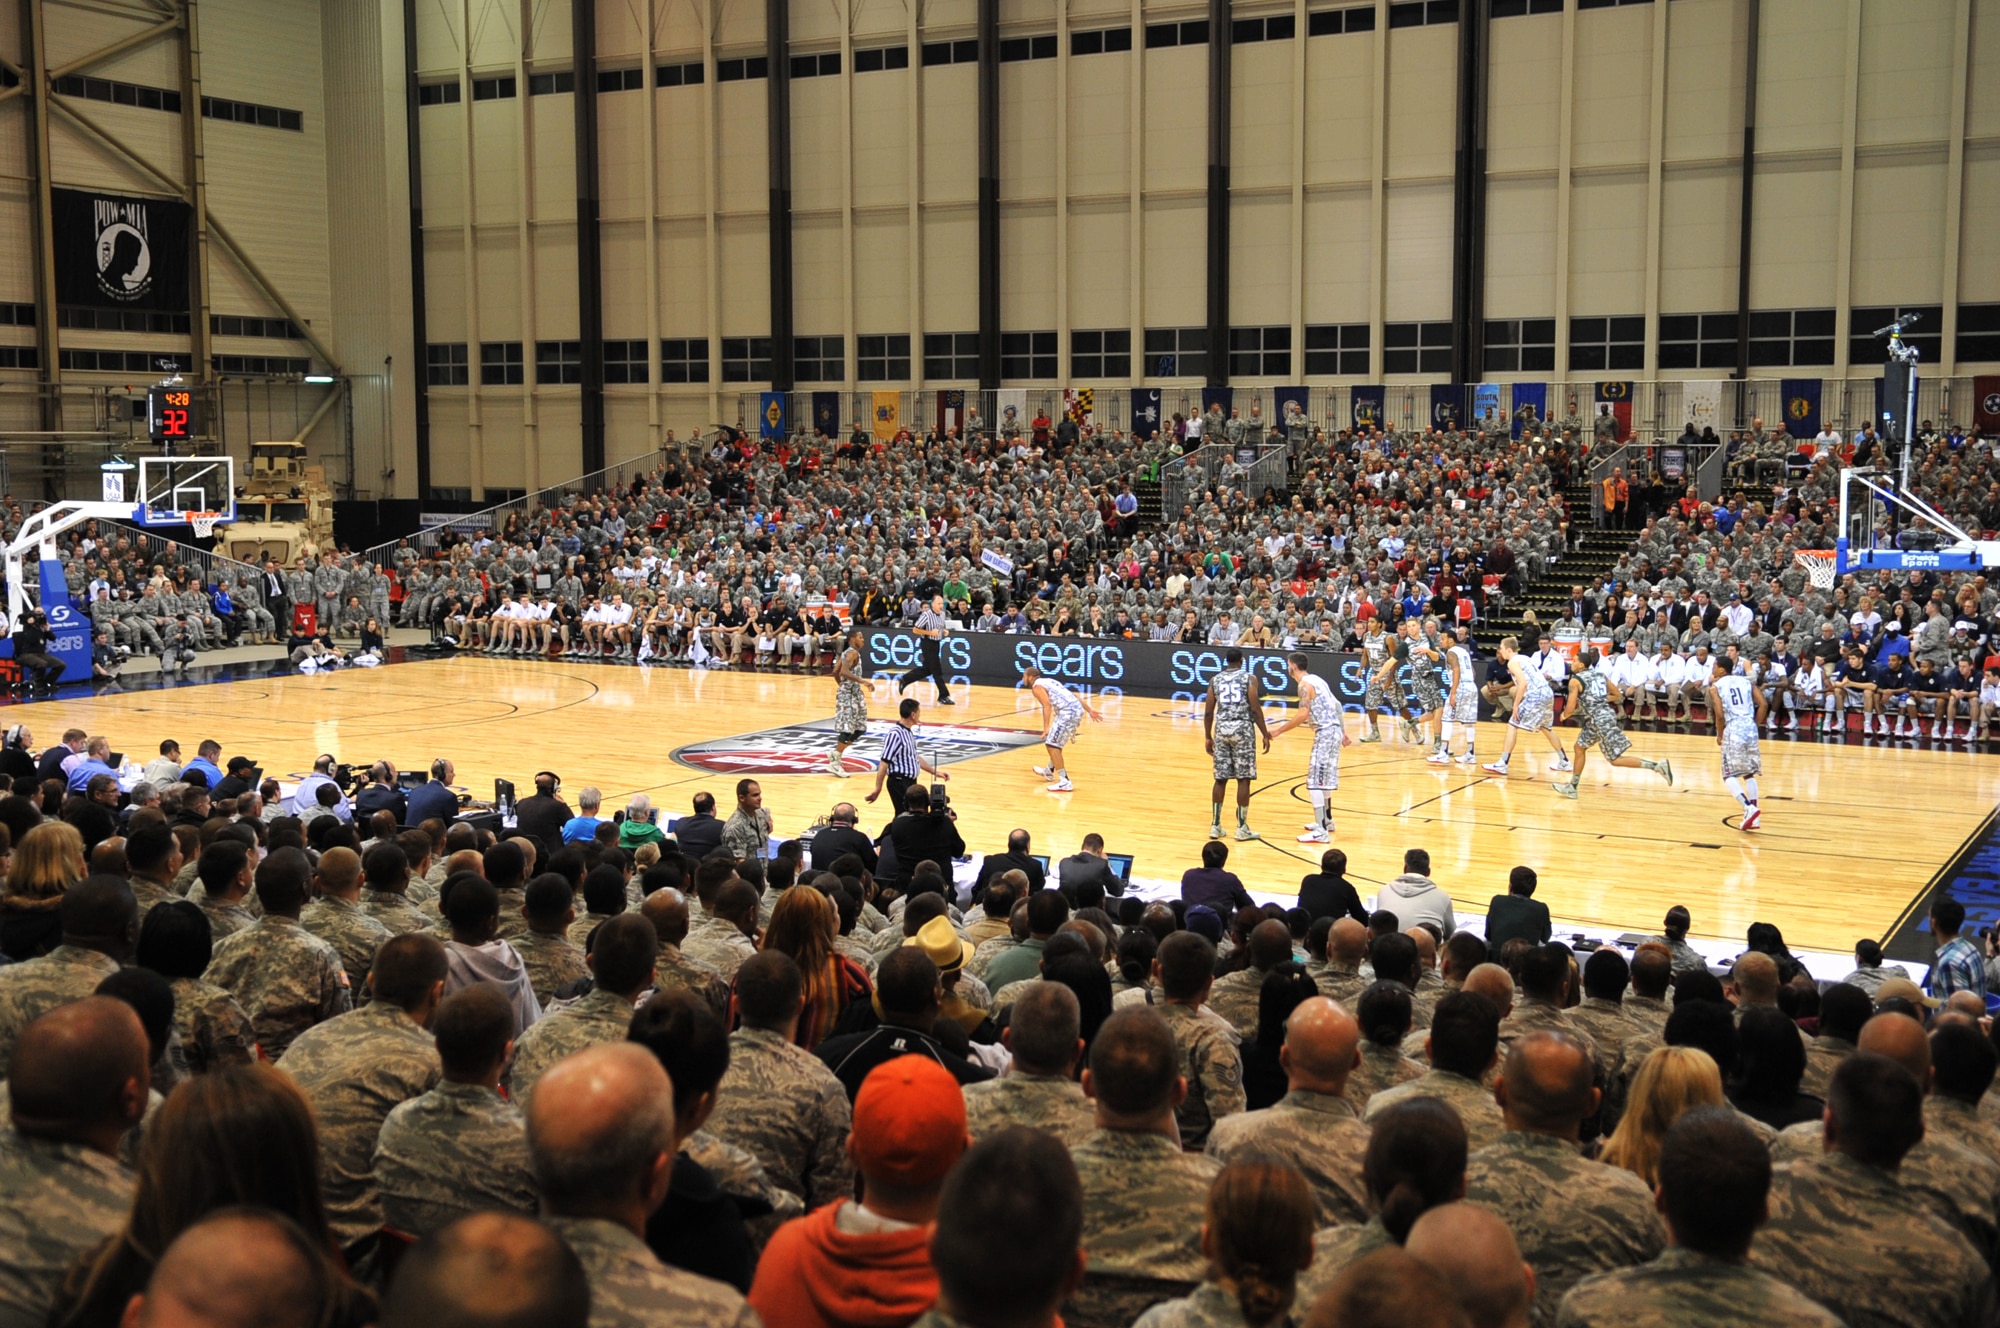 Service members watch the Armed Forces Classic basketball game between the Michigan State Spartans and University of Connecticut Huskies at Ramstein Air Base, Germany, Nov. 10, 2012.  The Huskies overcame the Spartans 66-62. (U.S. Air Force photo/Master Sgt. Wayne Clark)